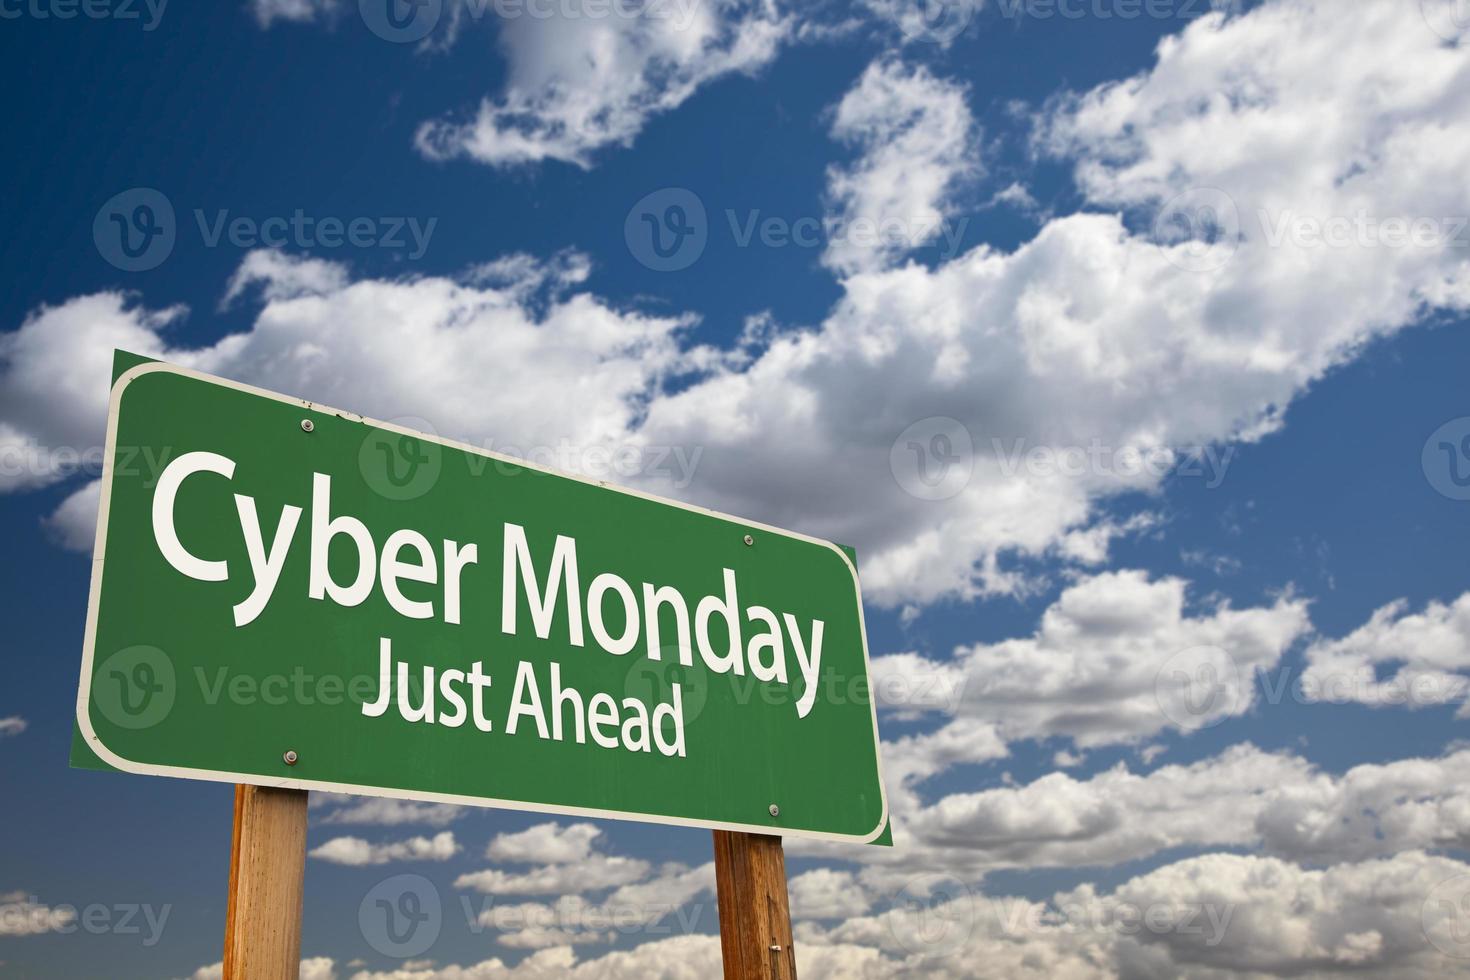 Cyber Monday Just Ahead Green Road Sign and Clouds photo